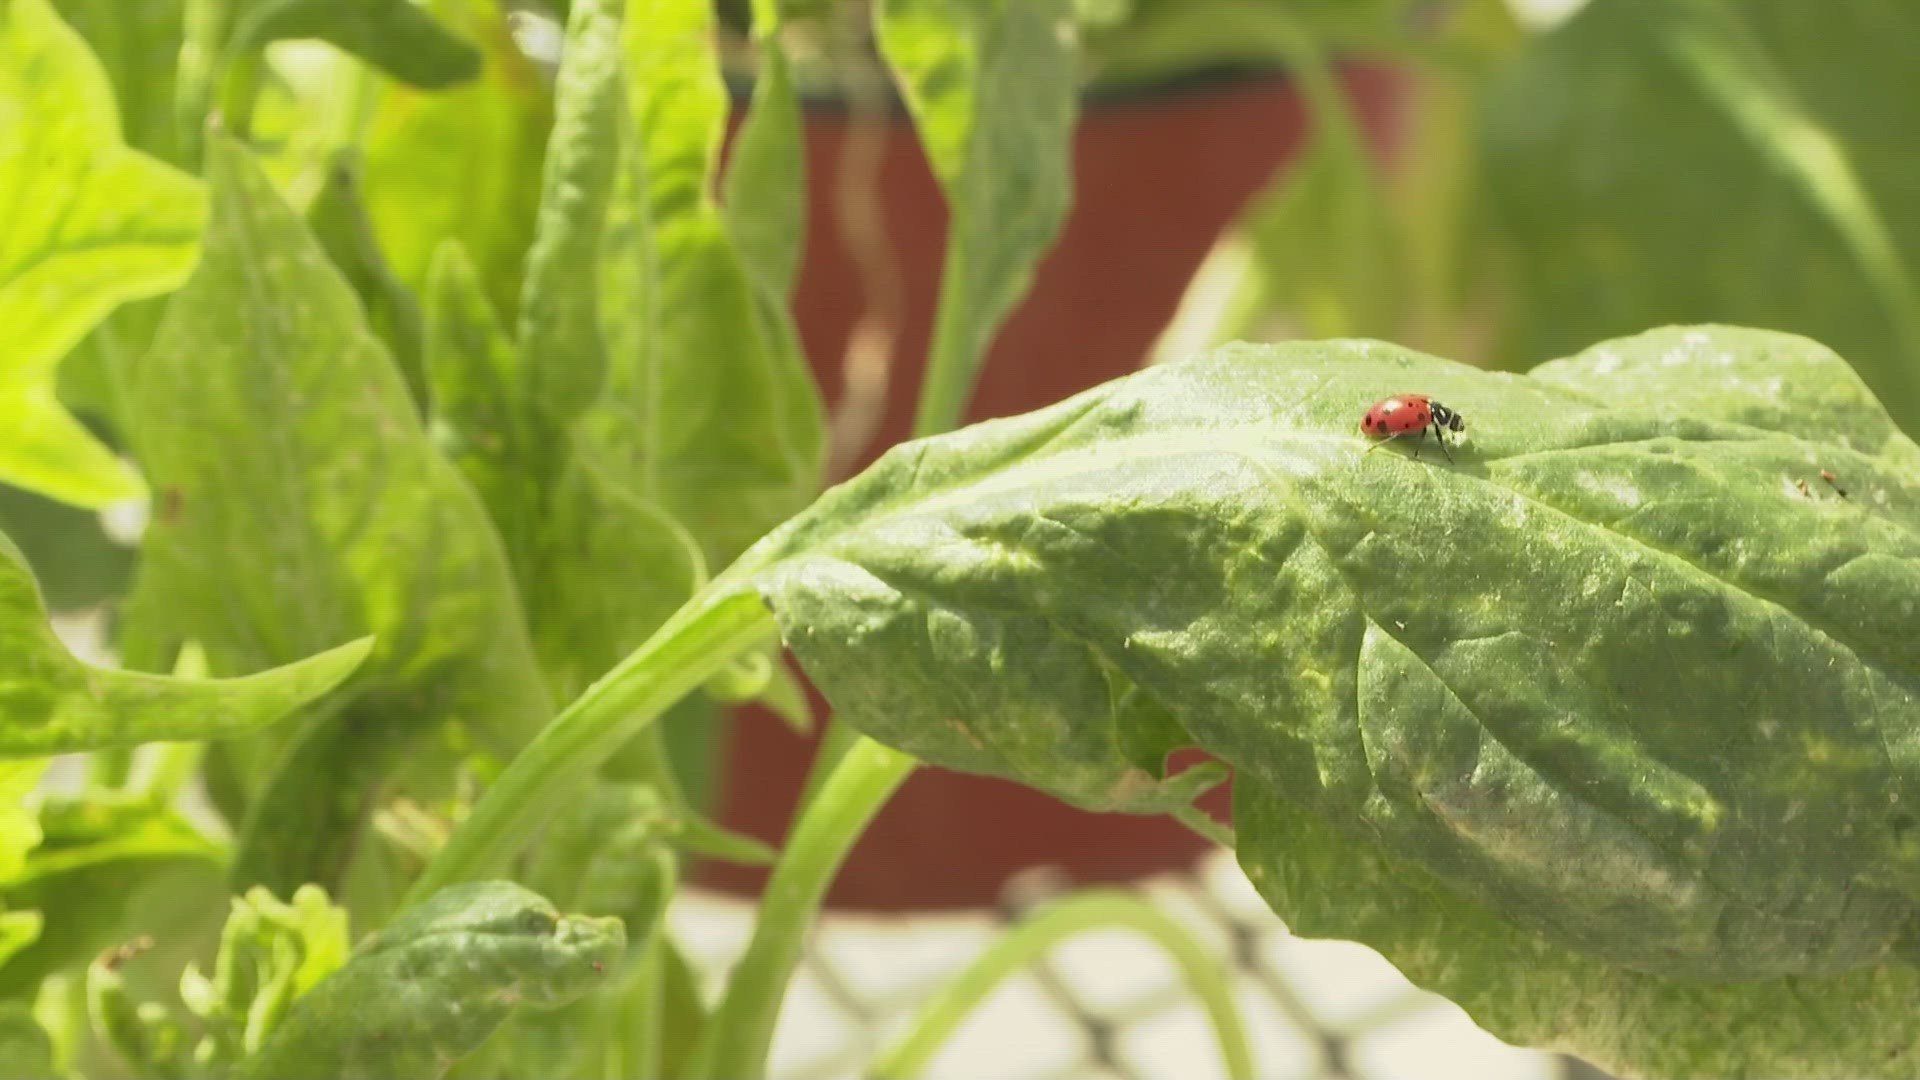 The UNH research looked deeper at what planting practices attract certain species that eat aphids.